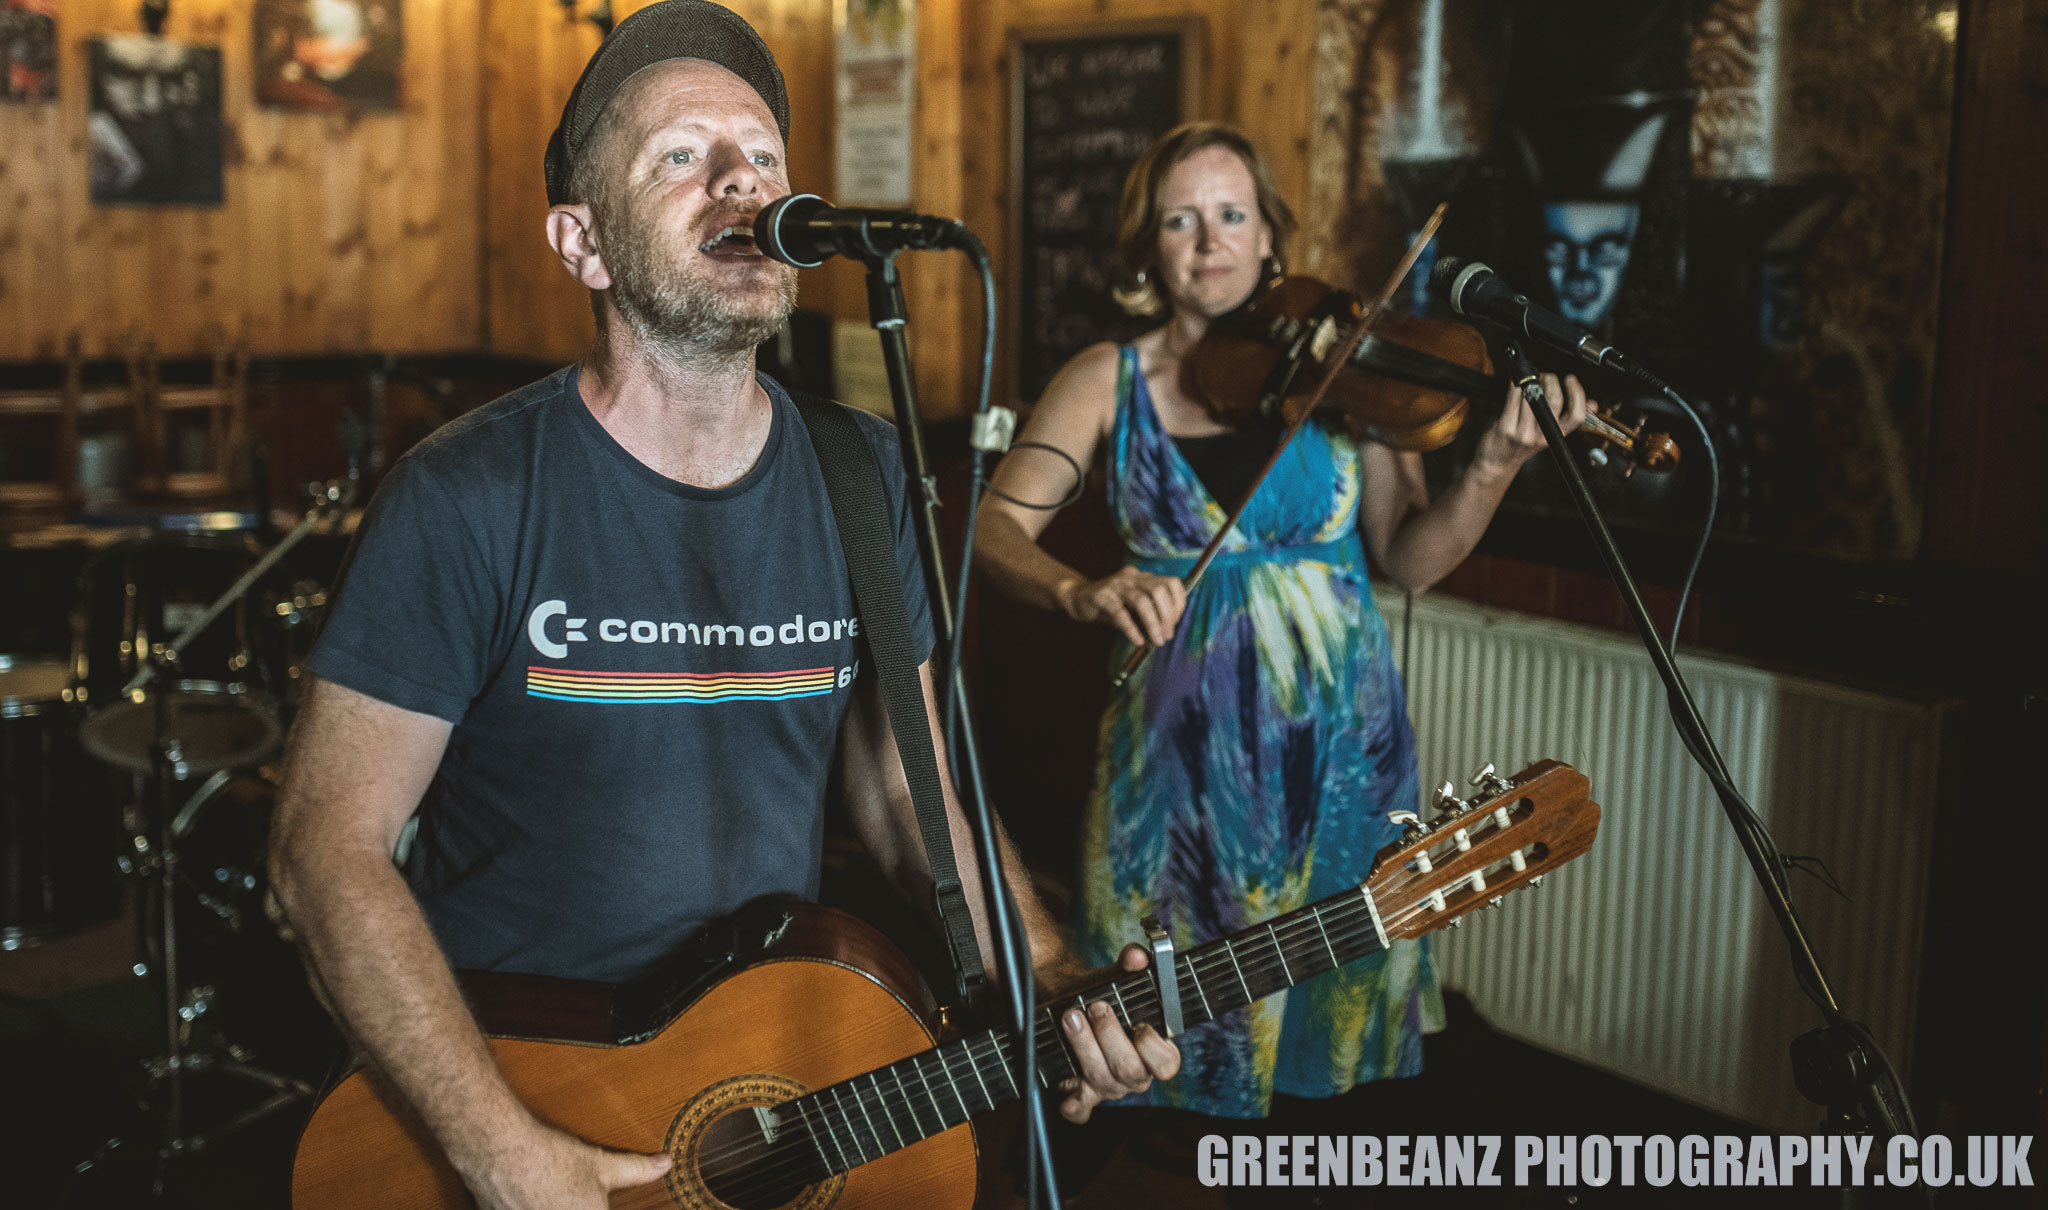 POG playing at the 2019 Phil Fest at Plymouth's Nowhere Inn